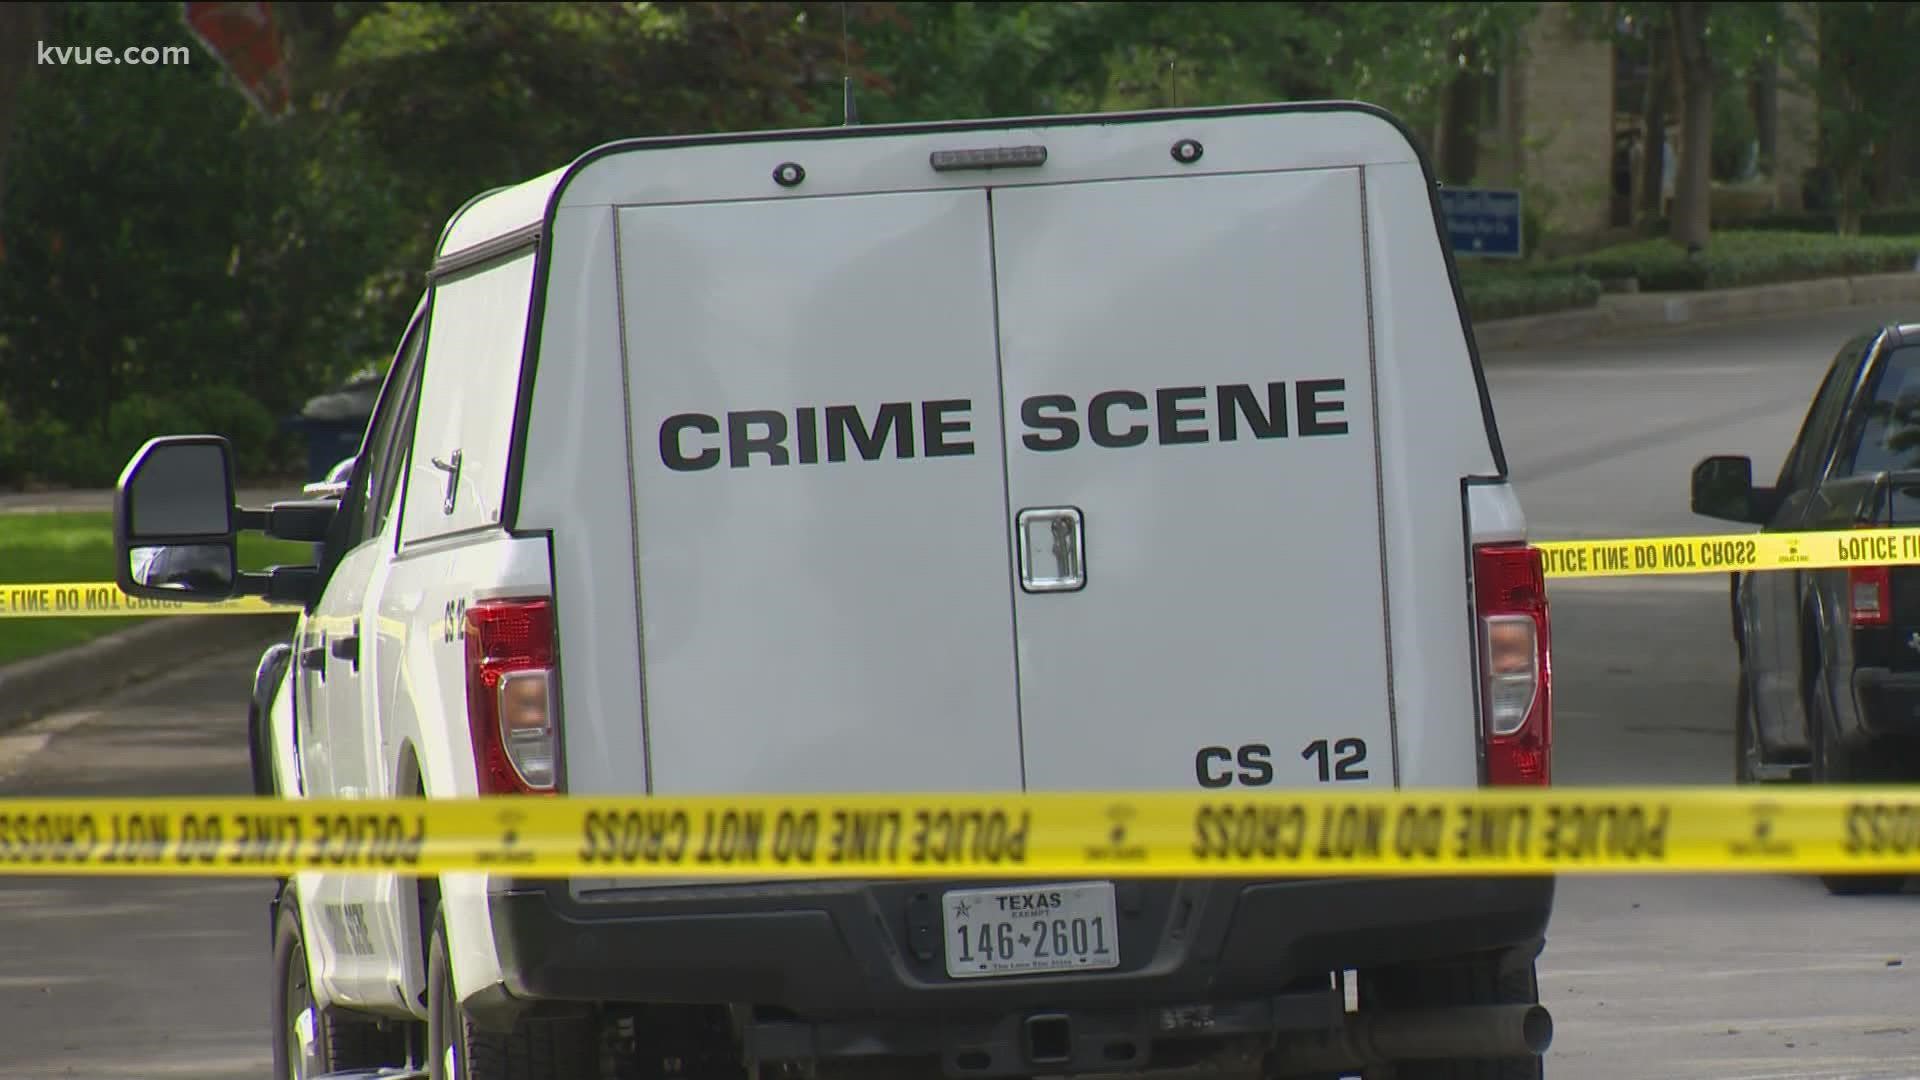 This marks the third suspicious death incident in Austin in just over a day.